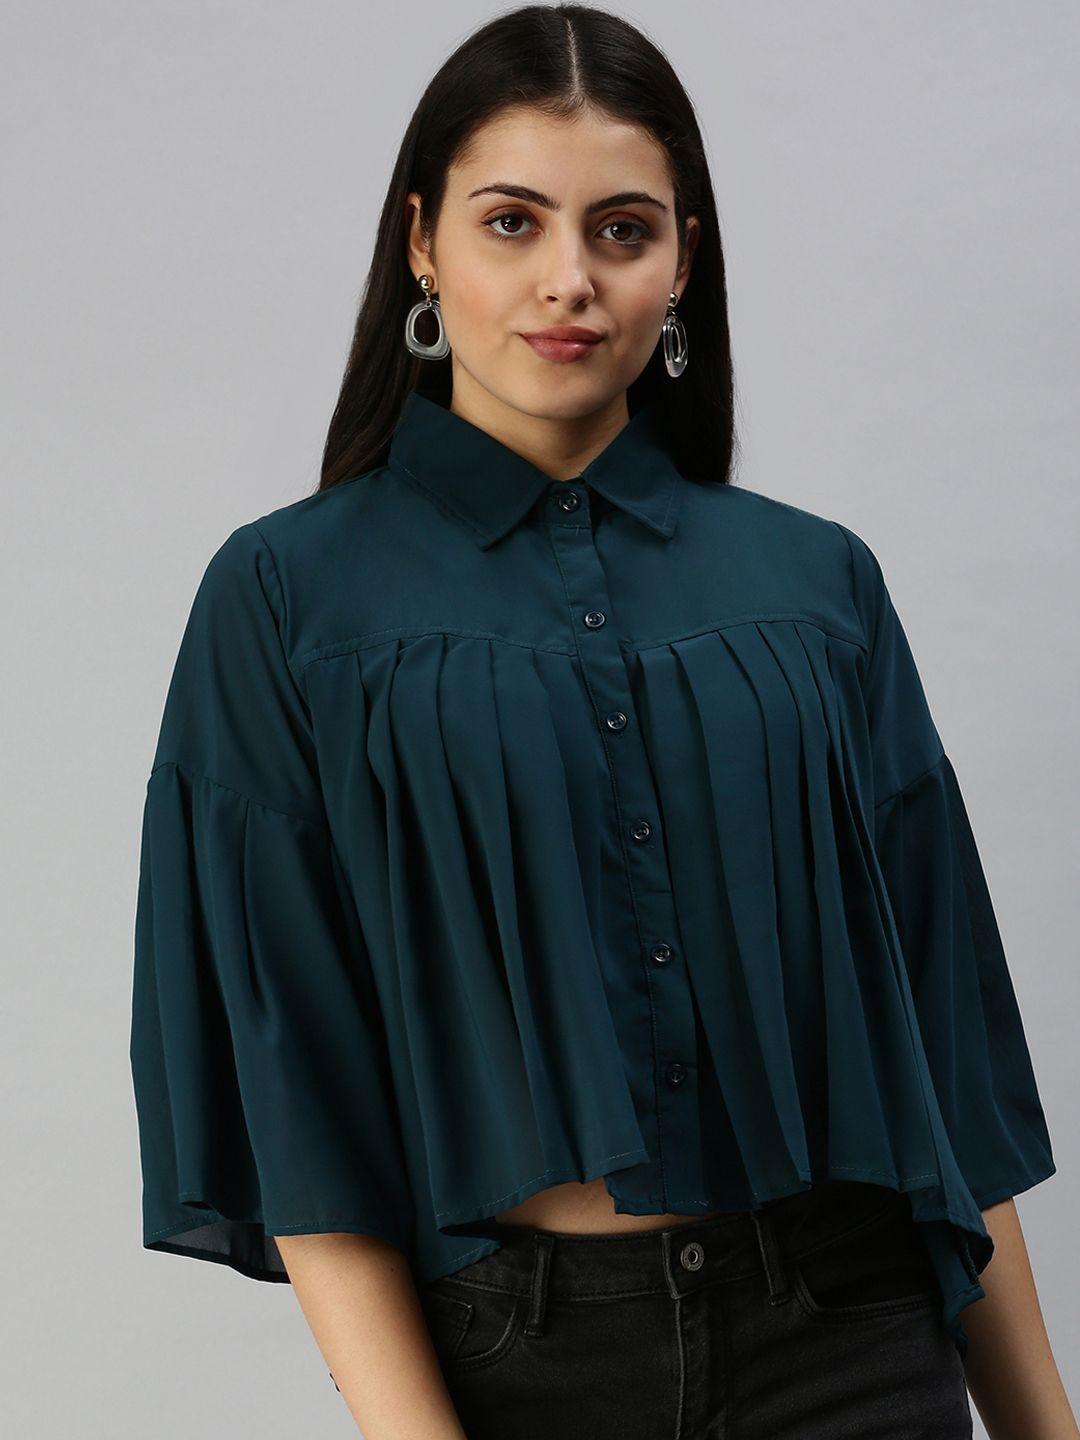 showoff teal green georgette shirt style crop top